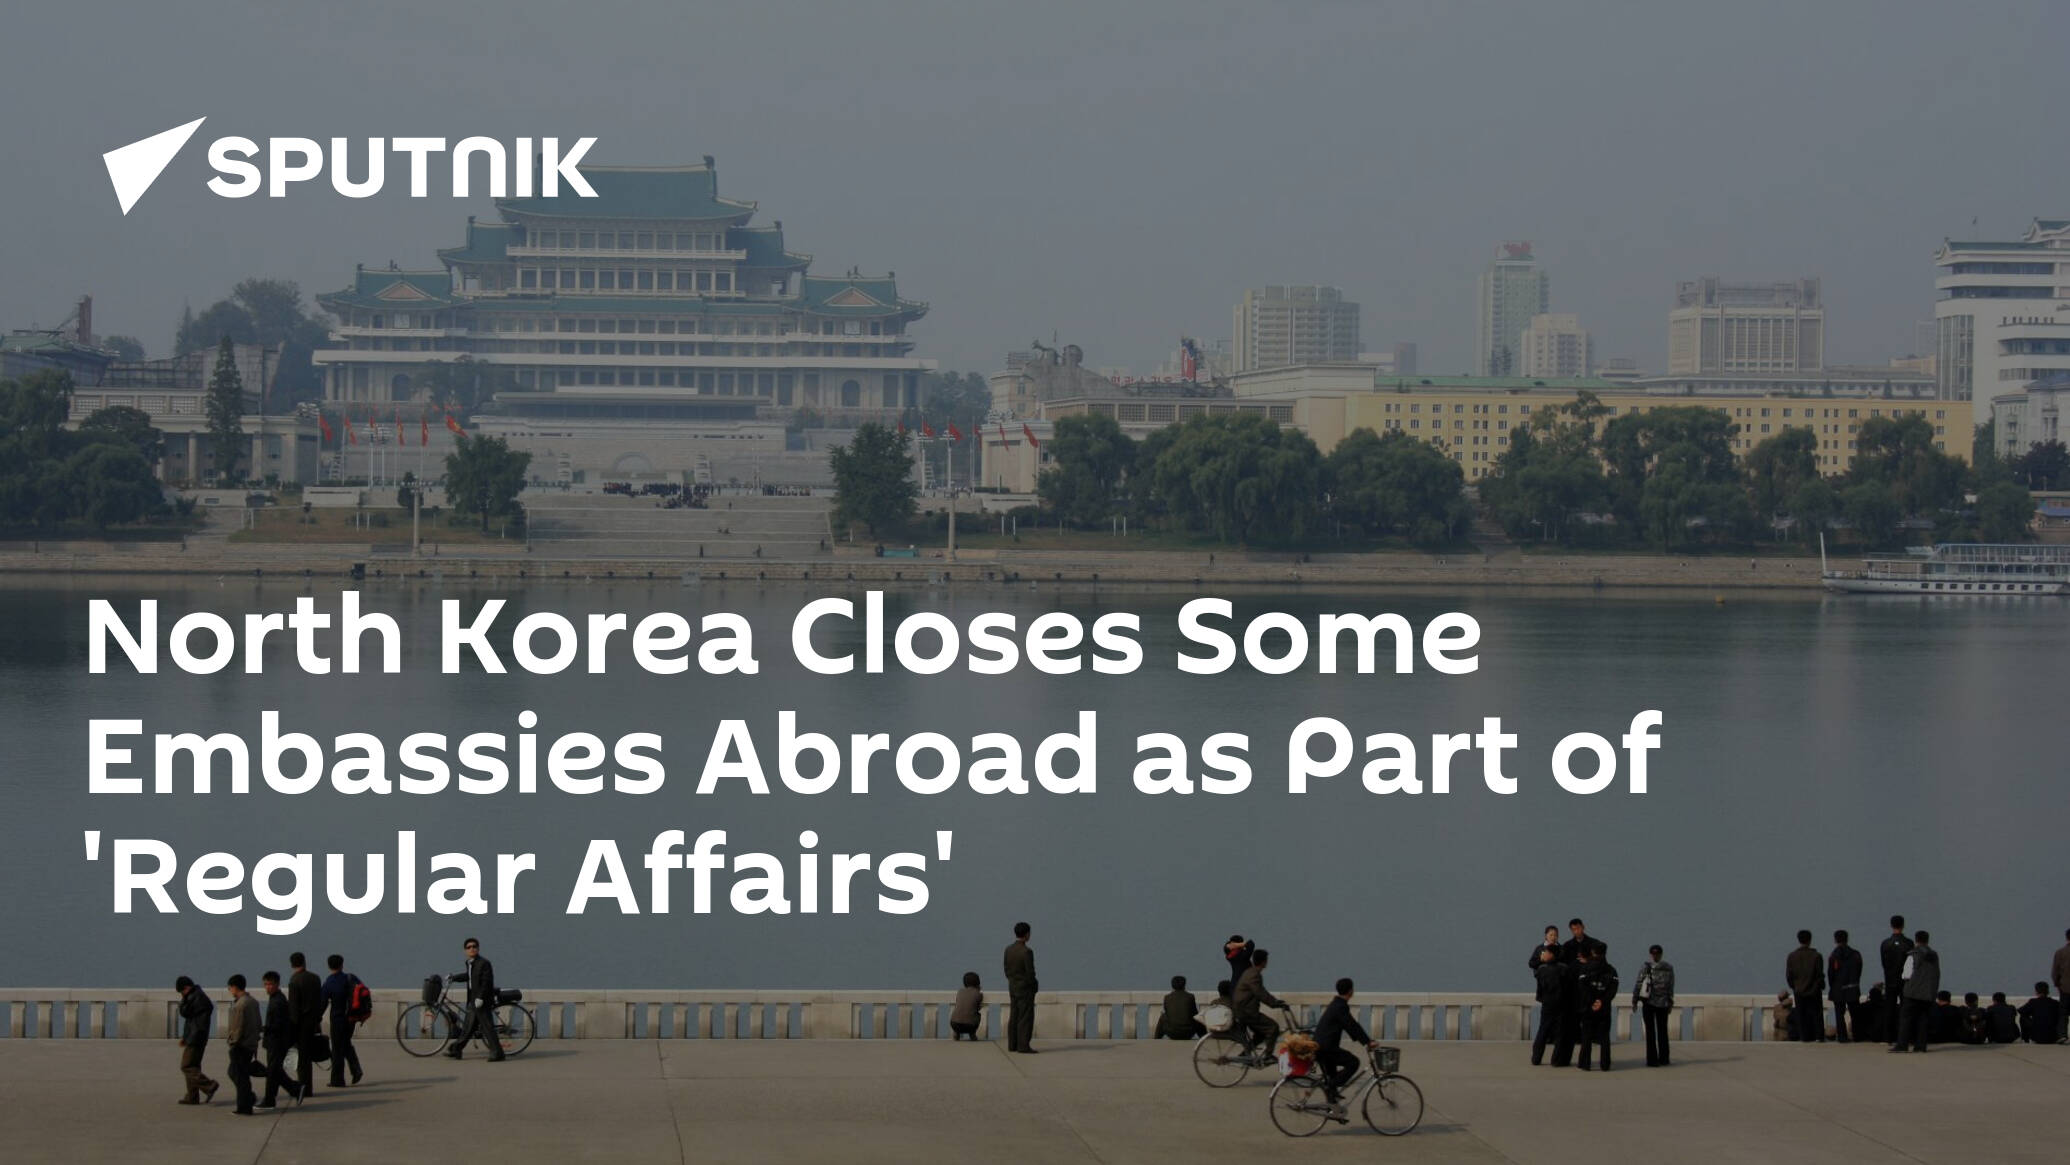 North Korea Closes Some Embassies Abroad as Part of 'Regular Affairs'